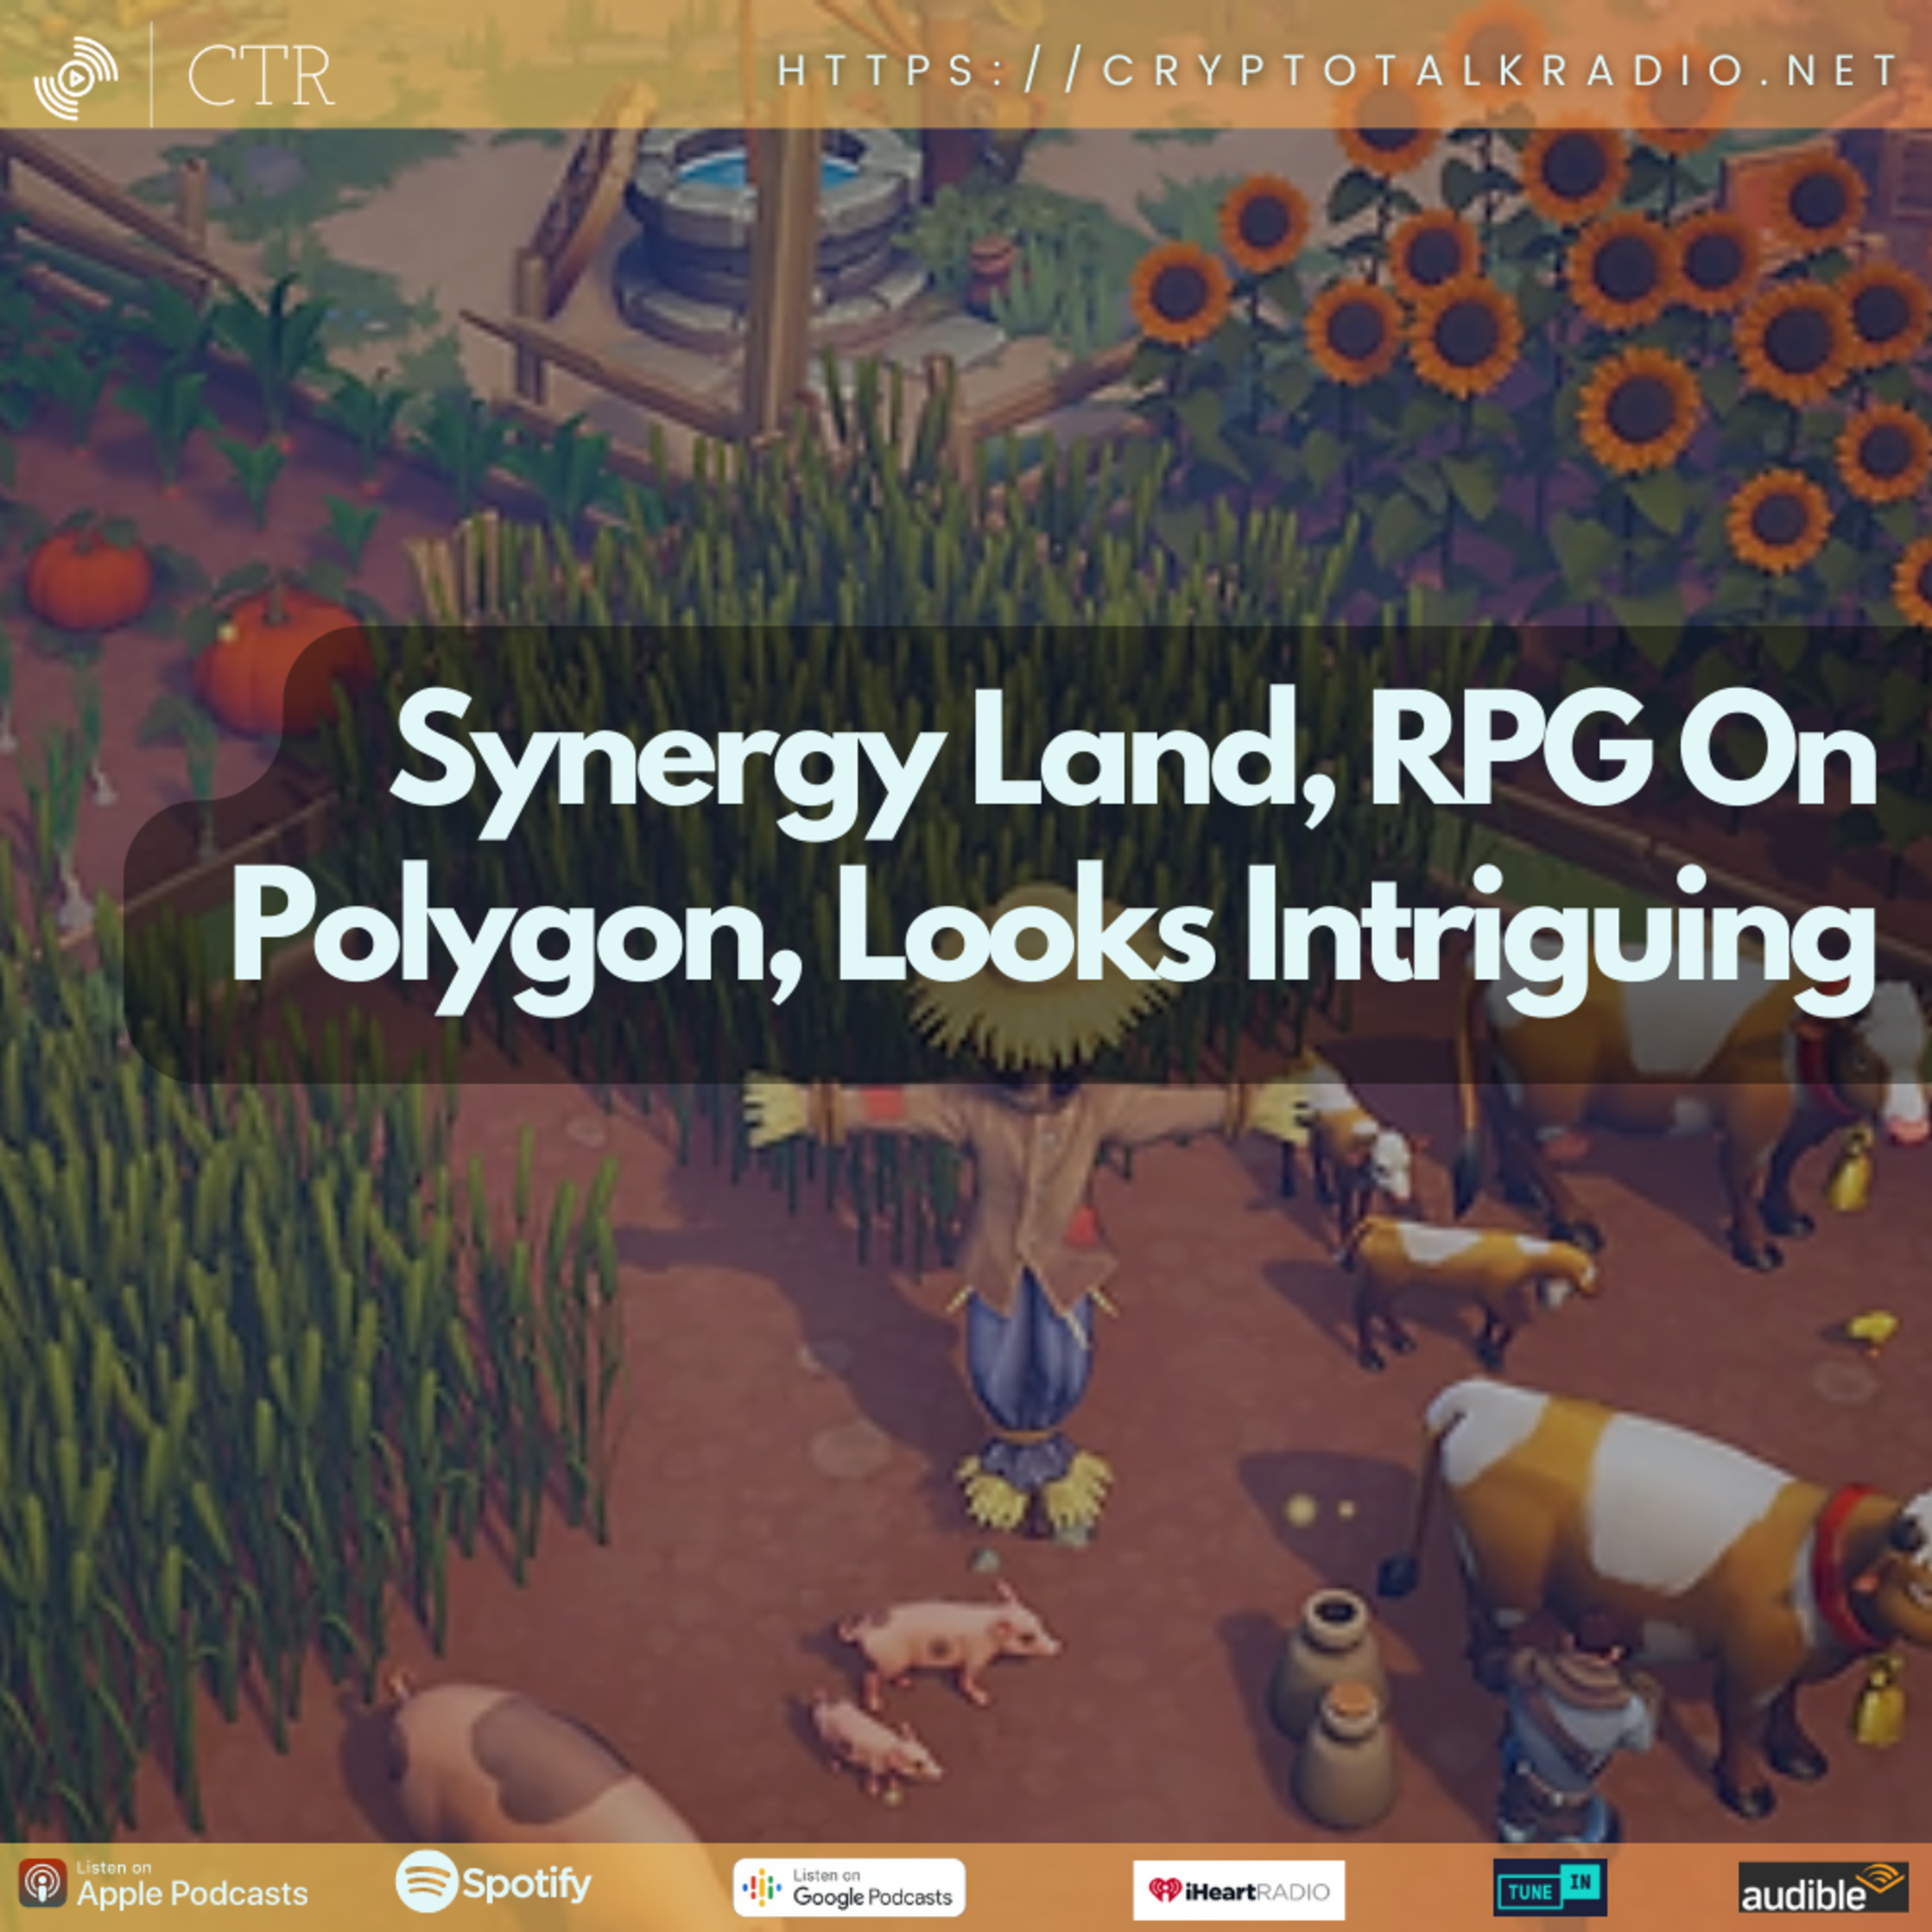 Synergy Land, RPG On Polygon, Looks Intriguing